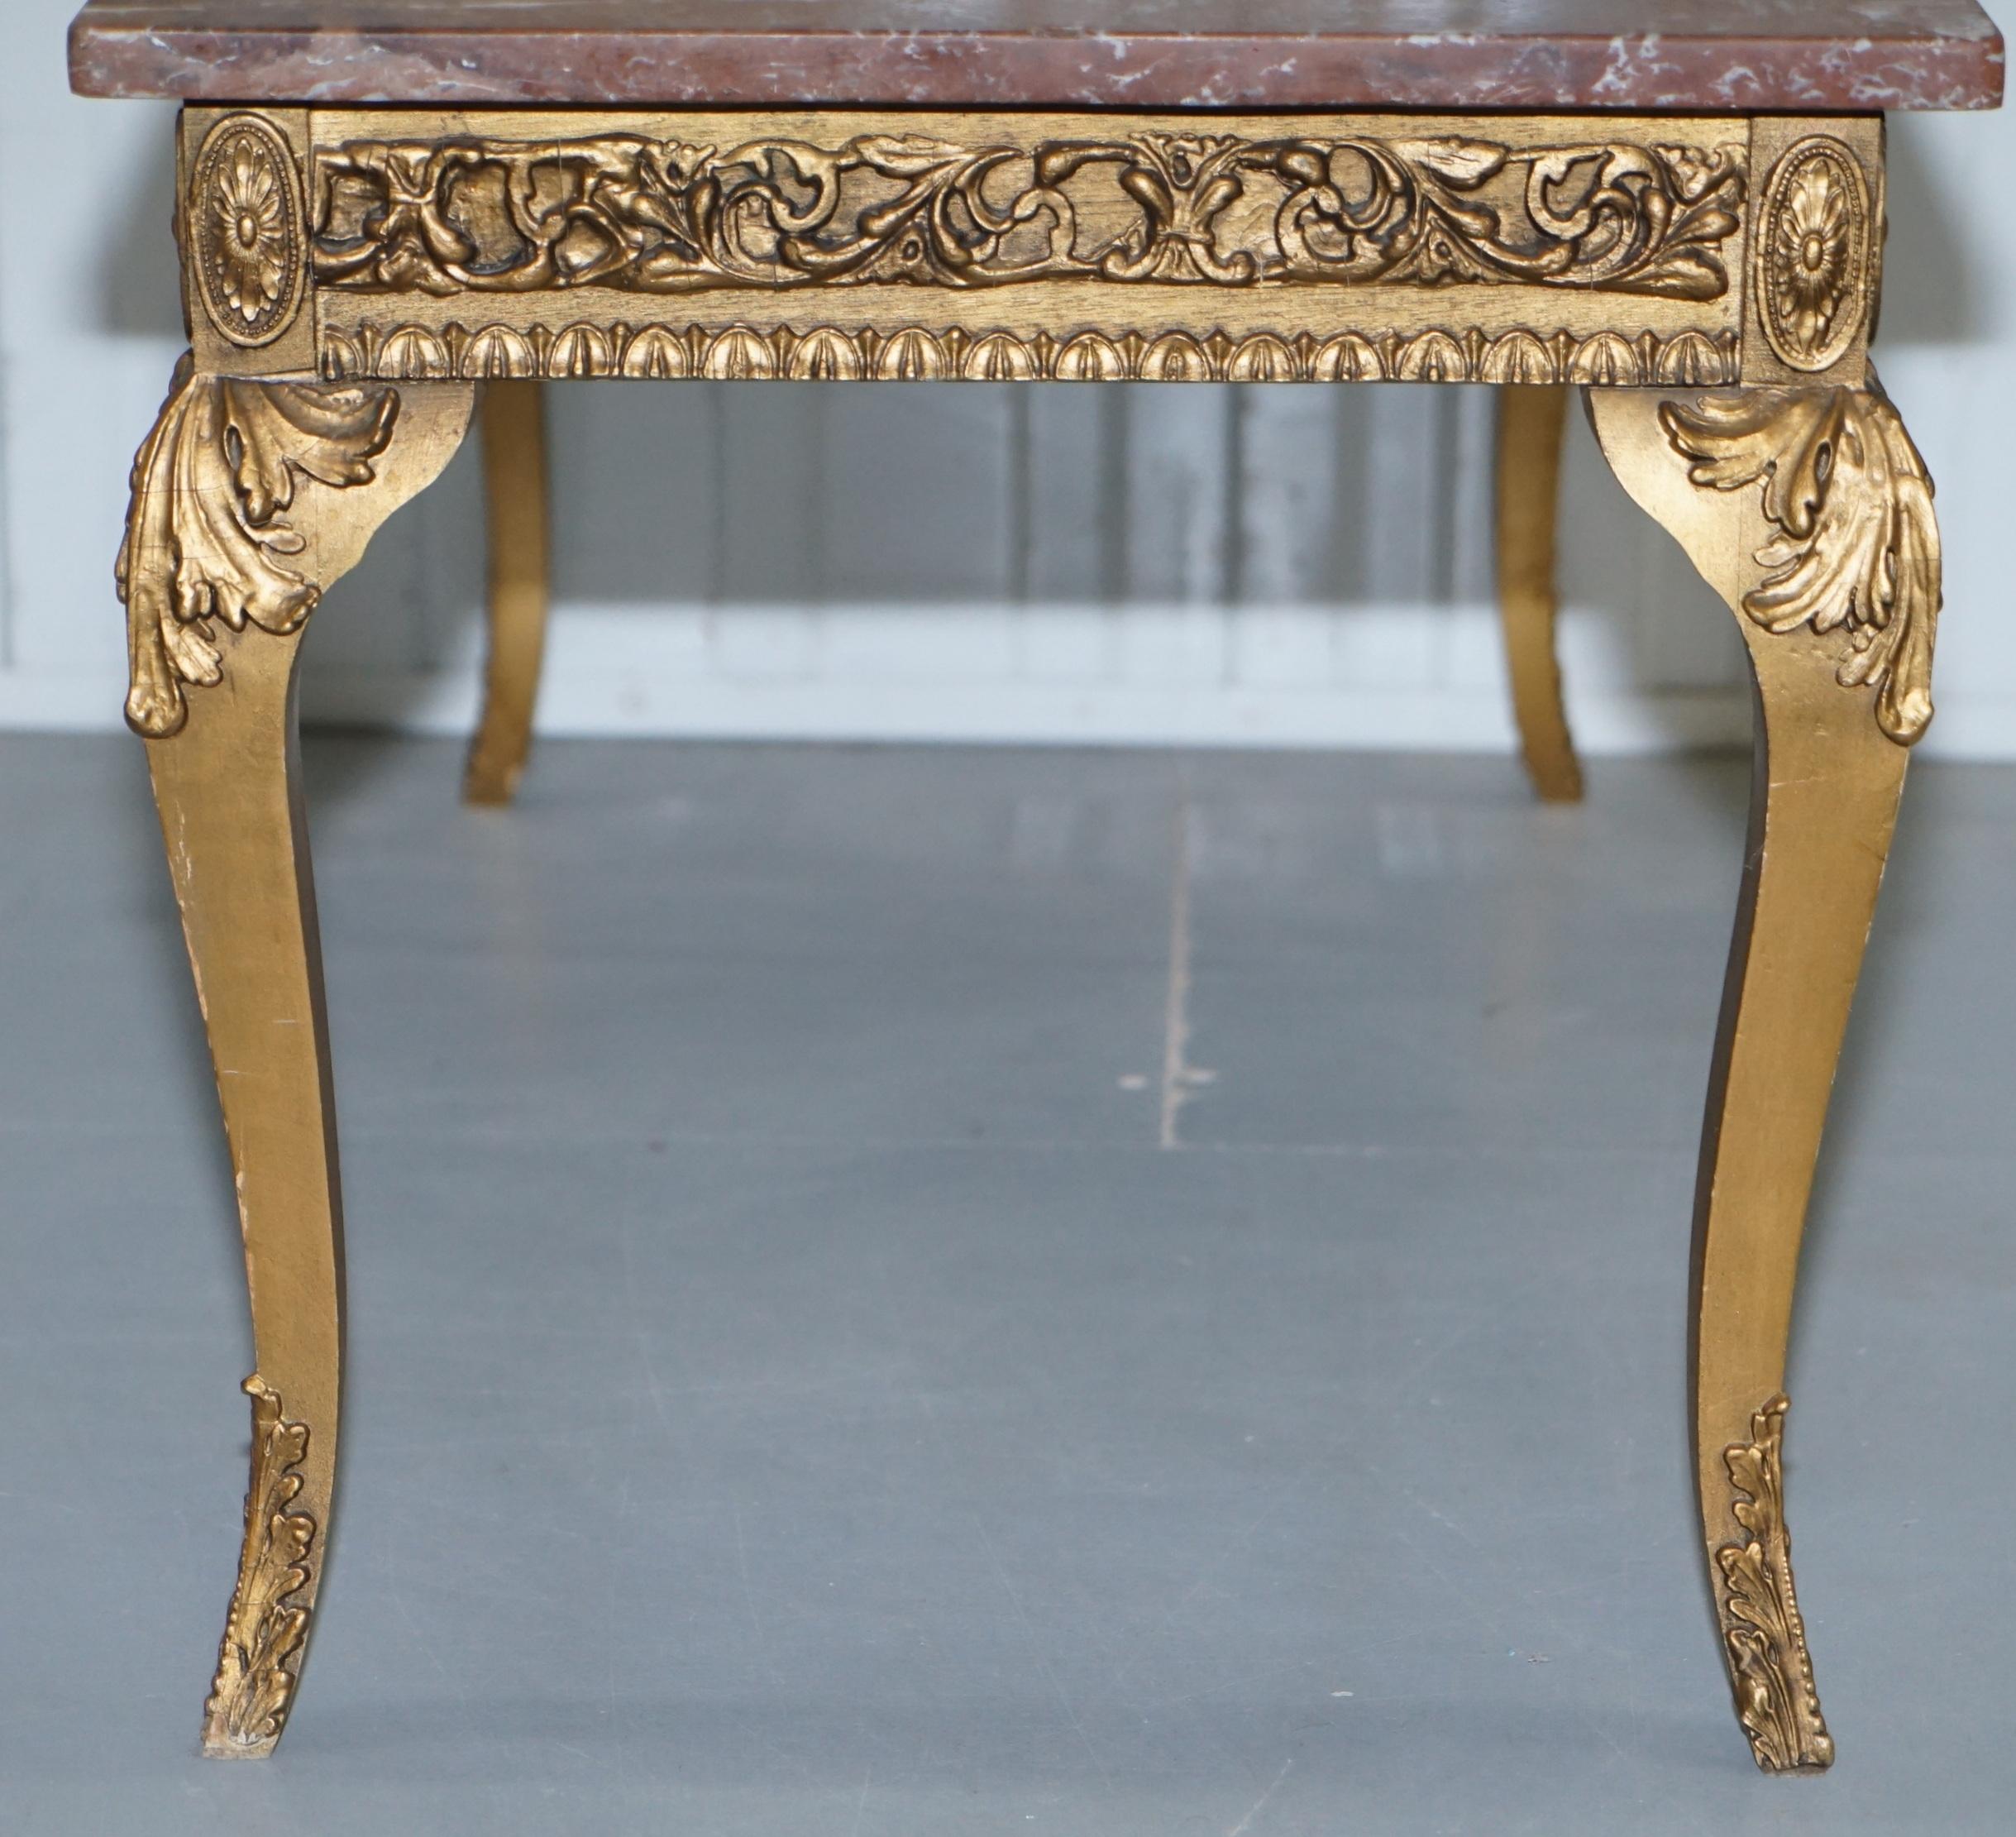 Rouge Marble Topped French Giltwood Coffee Table Heavy Rococo Baroque Carving 10